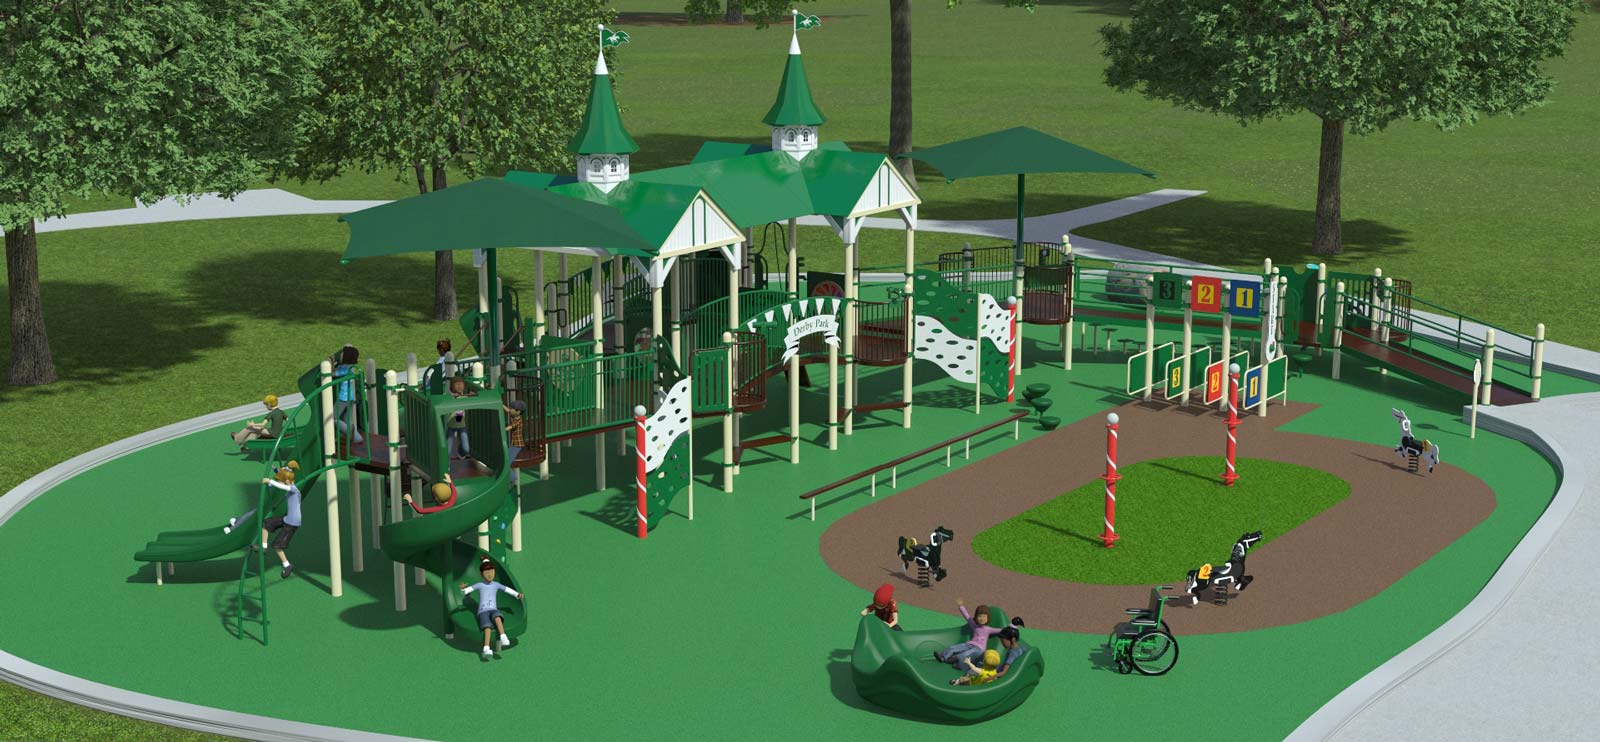 image of a rendering of the 5 to 12 year old playground